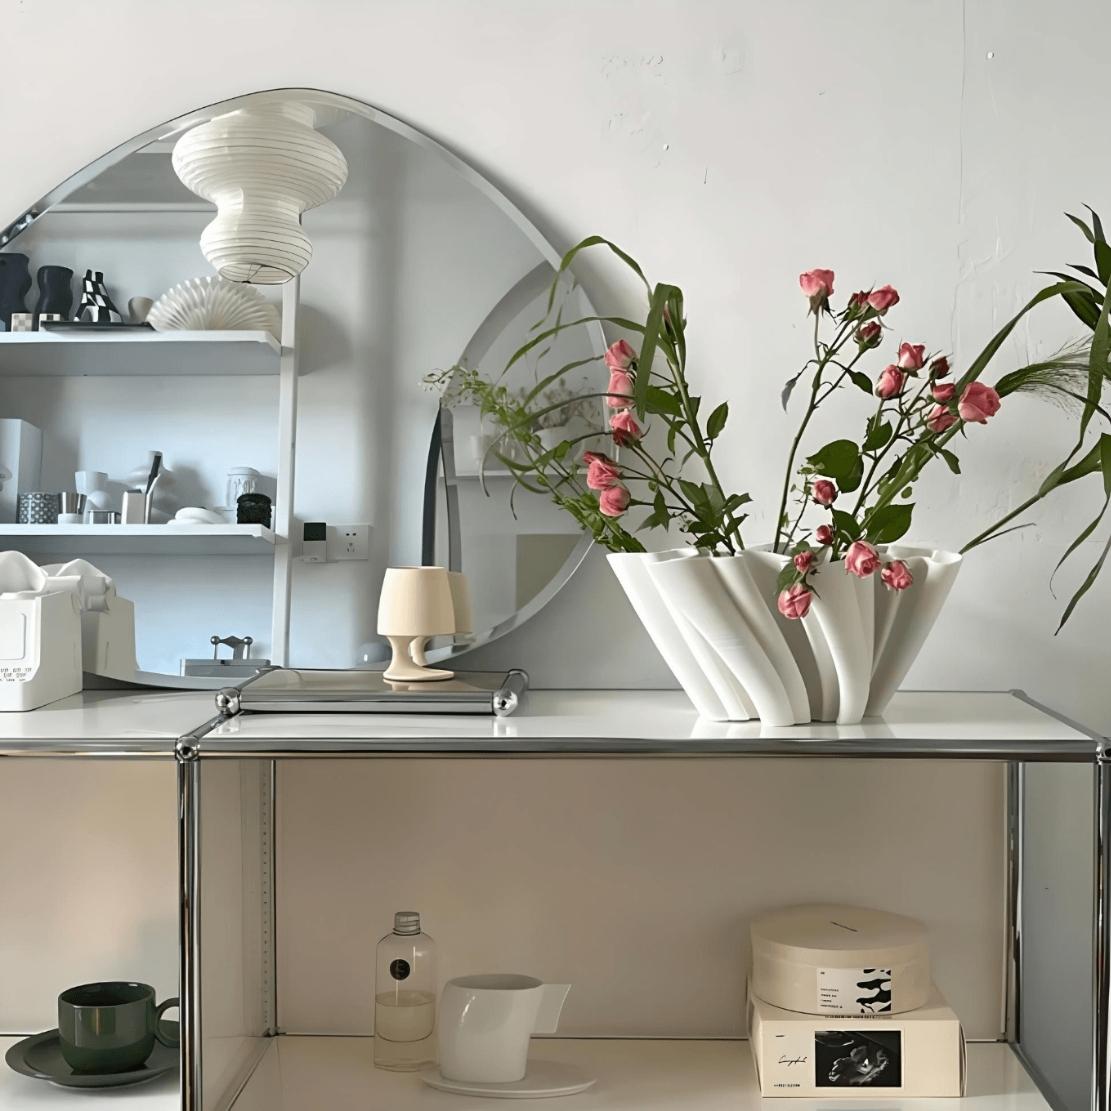 Large, ceramic wavy bowl with flowers in a modern, nordic decor room